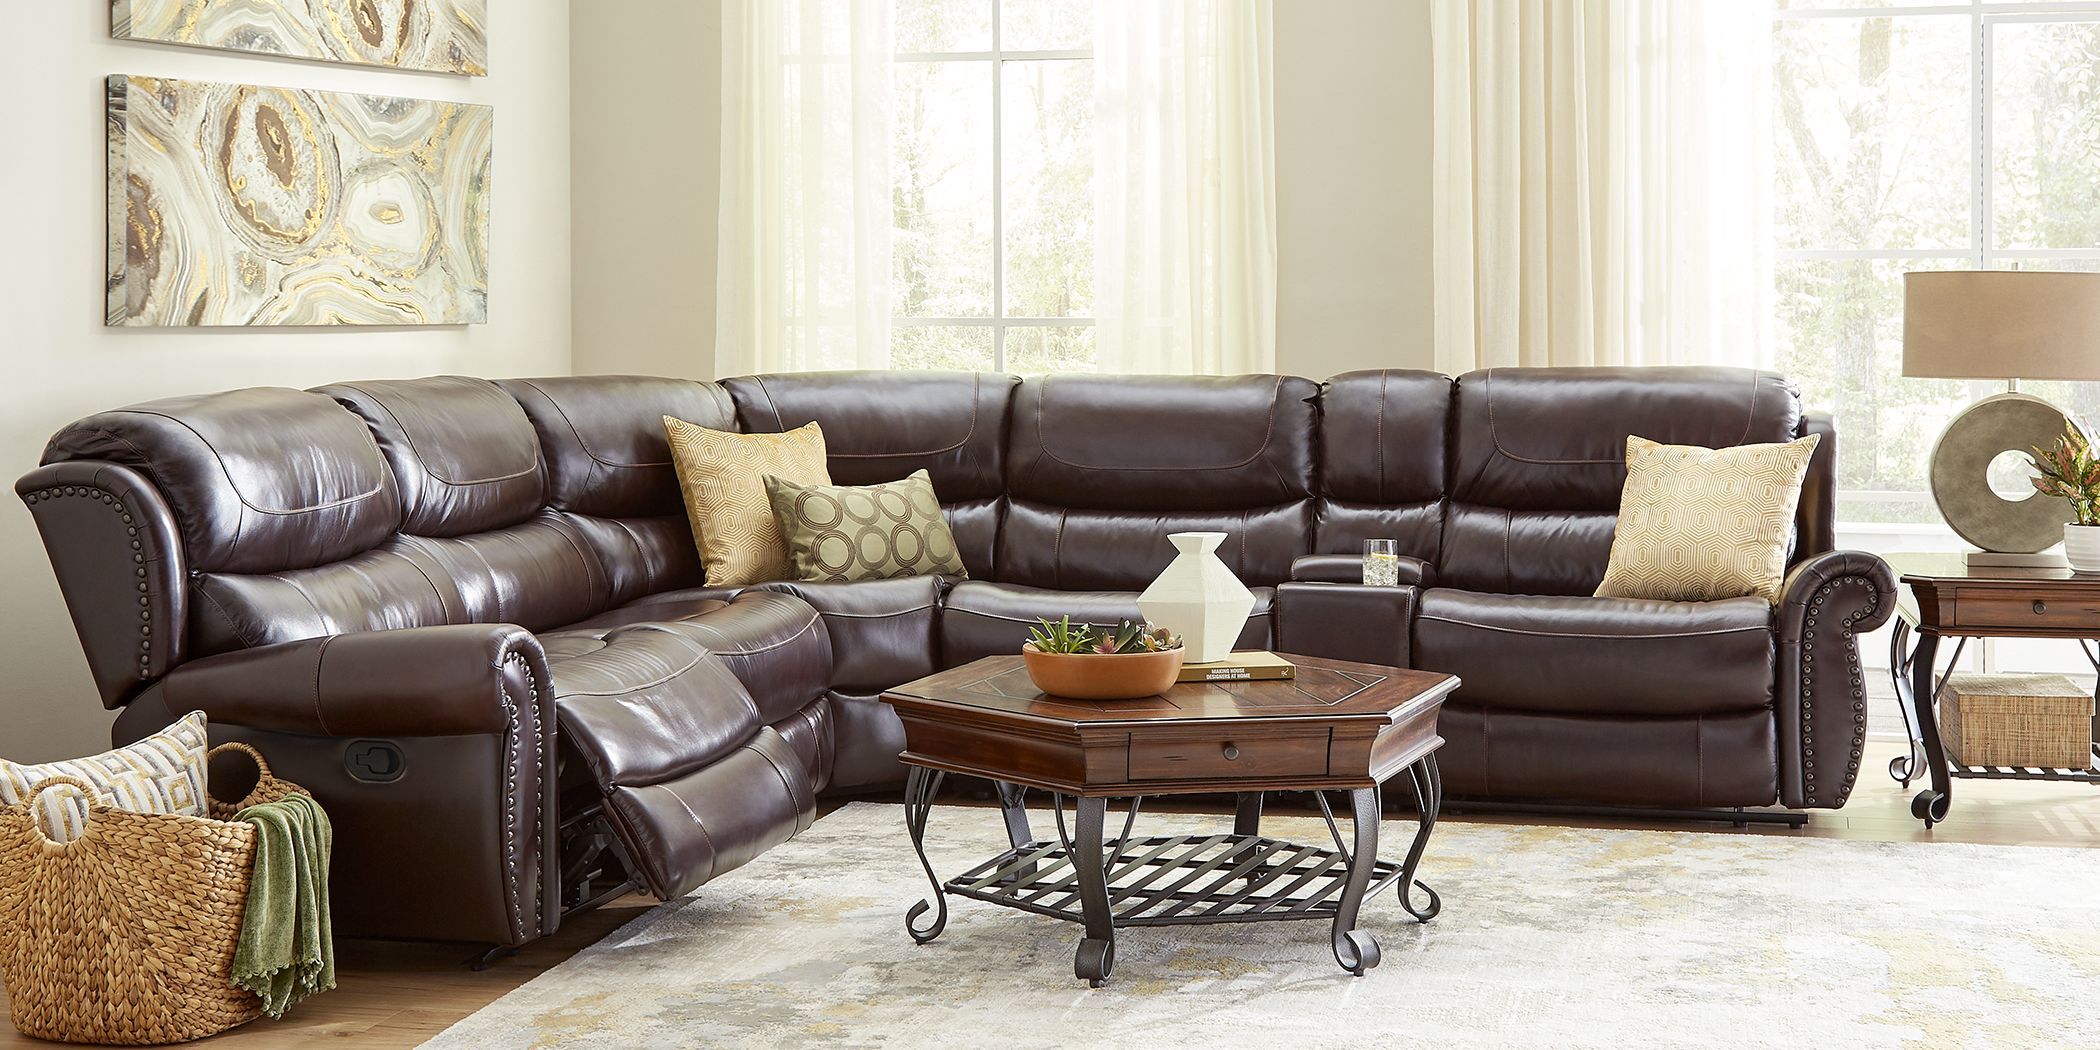 Brown Leather Sectional In Living Room